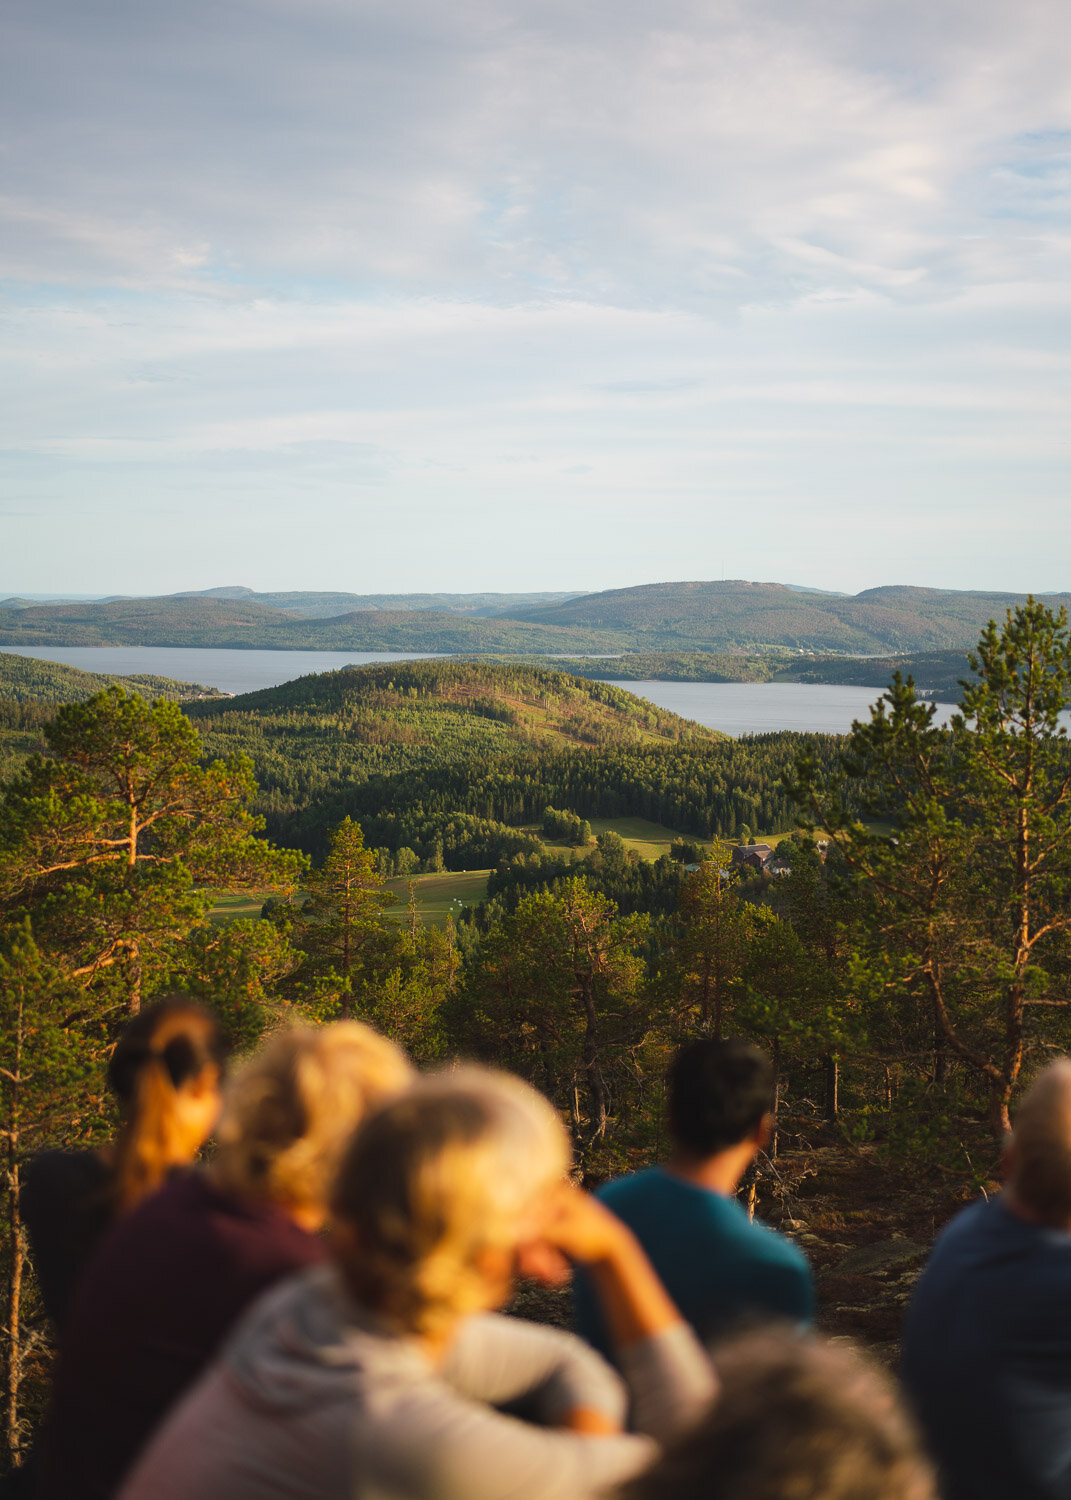 Photography from Sweden's High Coast Hike, a UNESCO World Heritage site